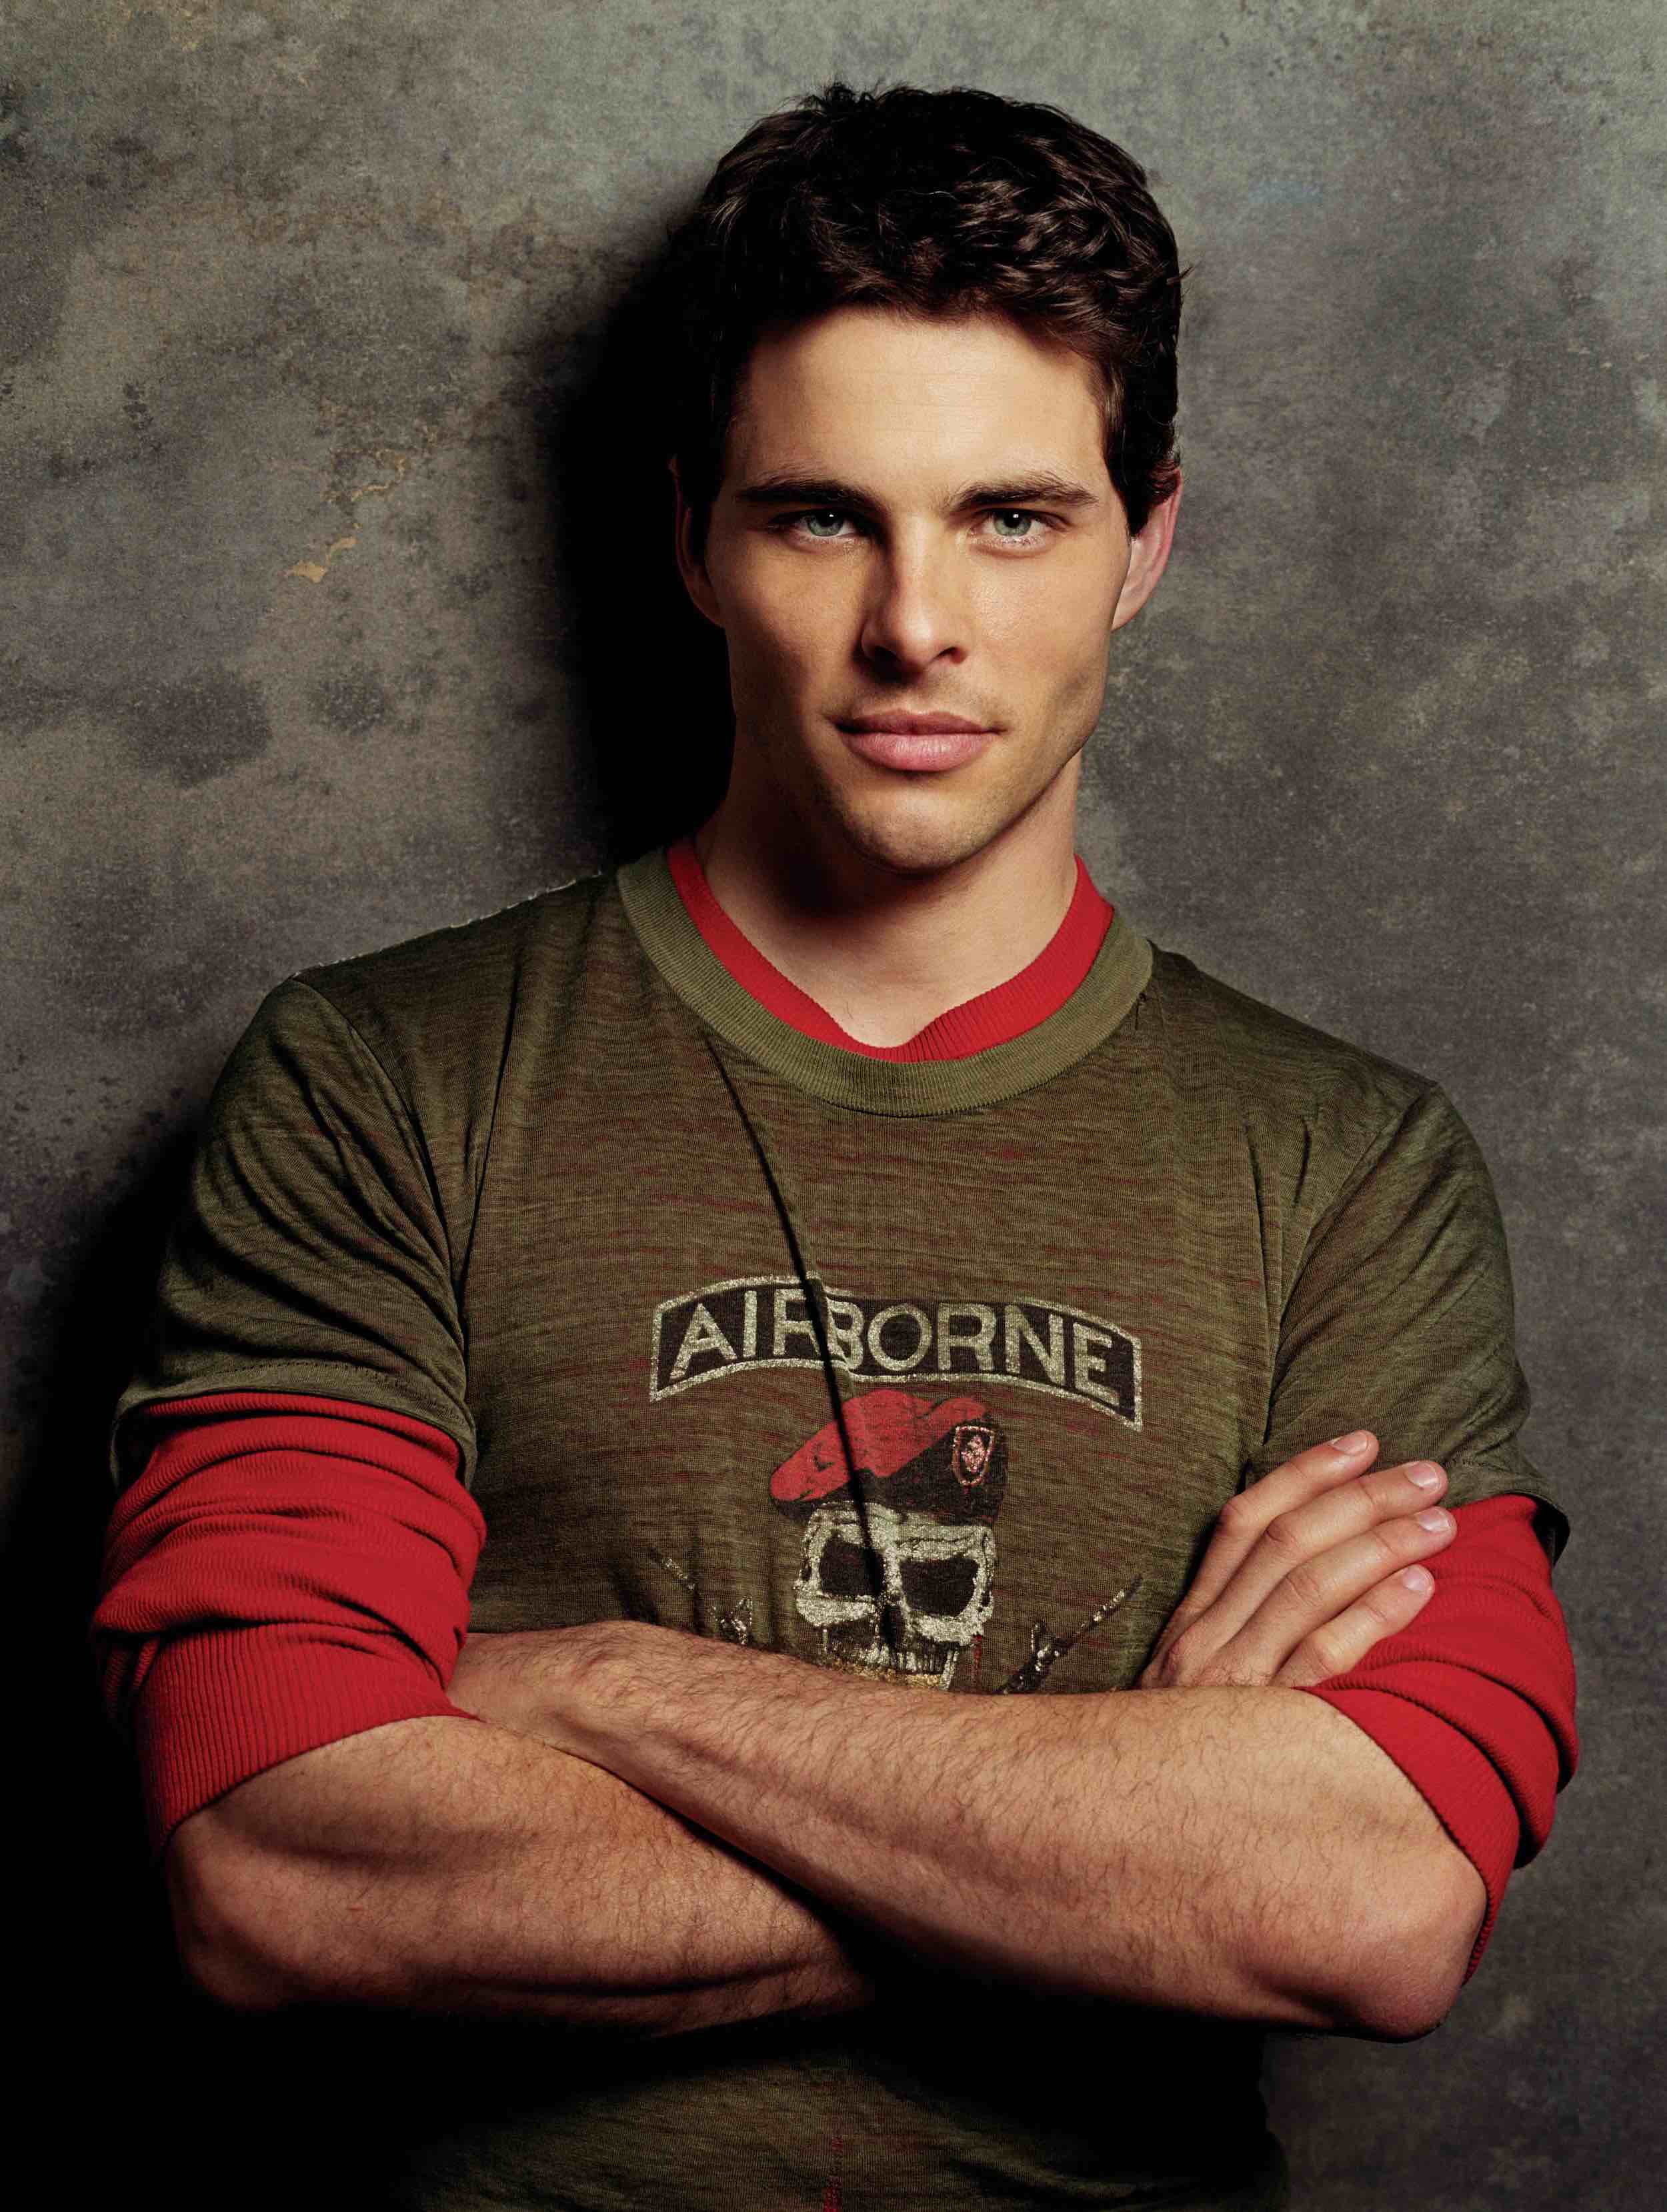 Actor James Marsden photographed by Mark Liddell